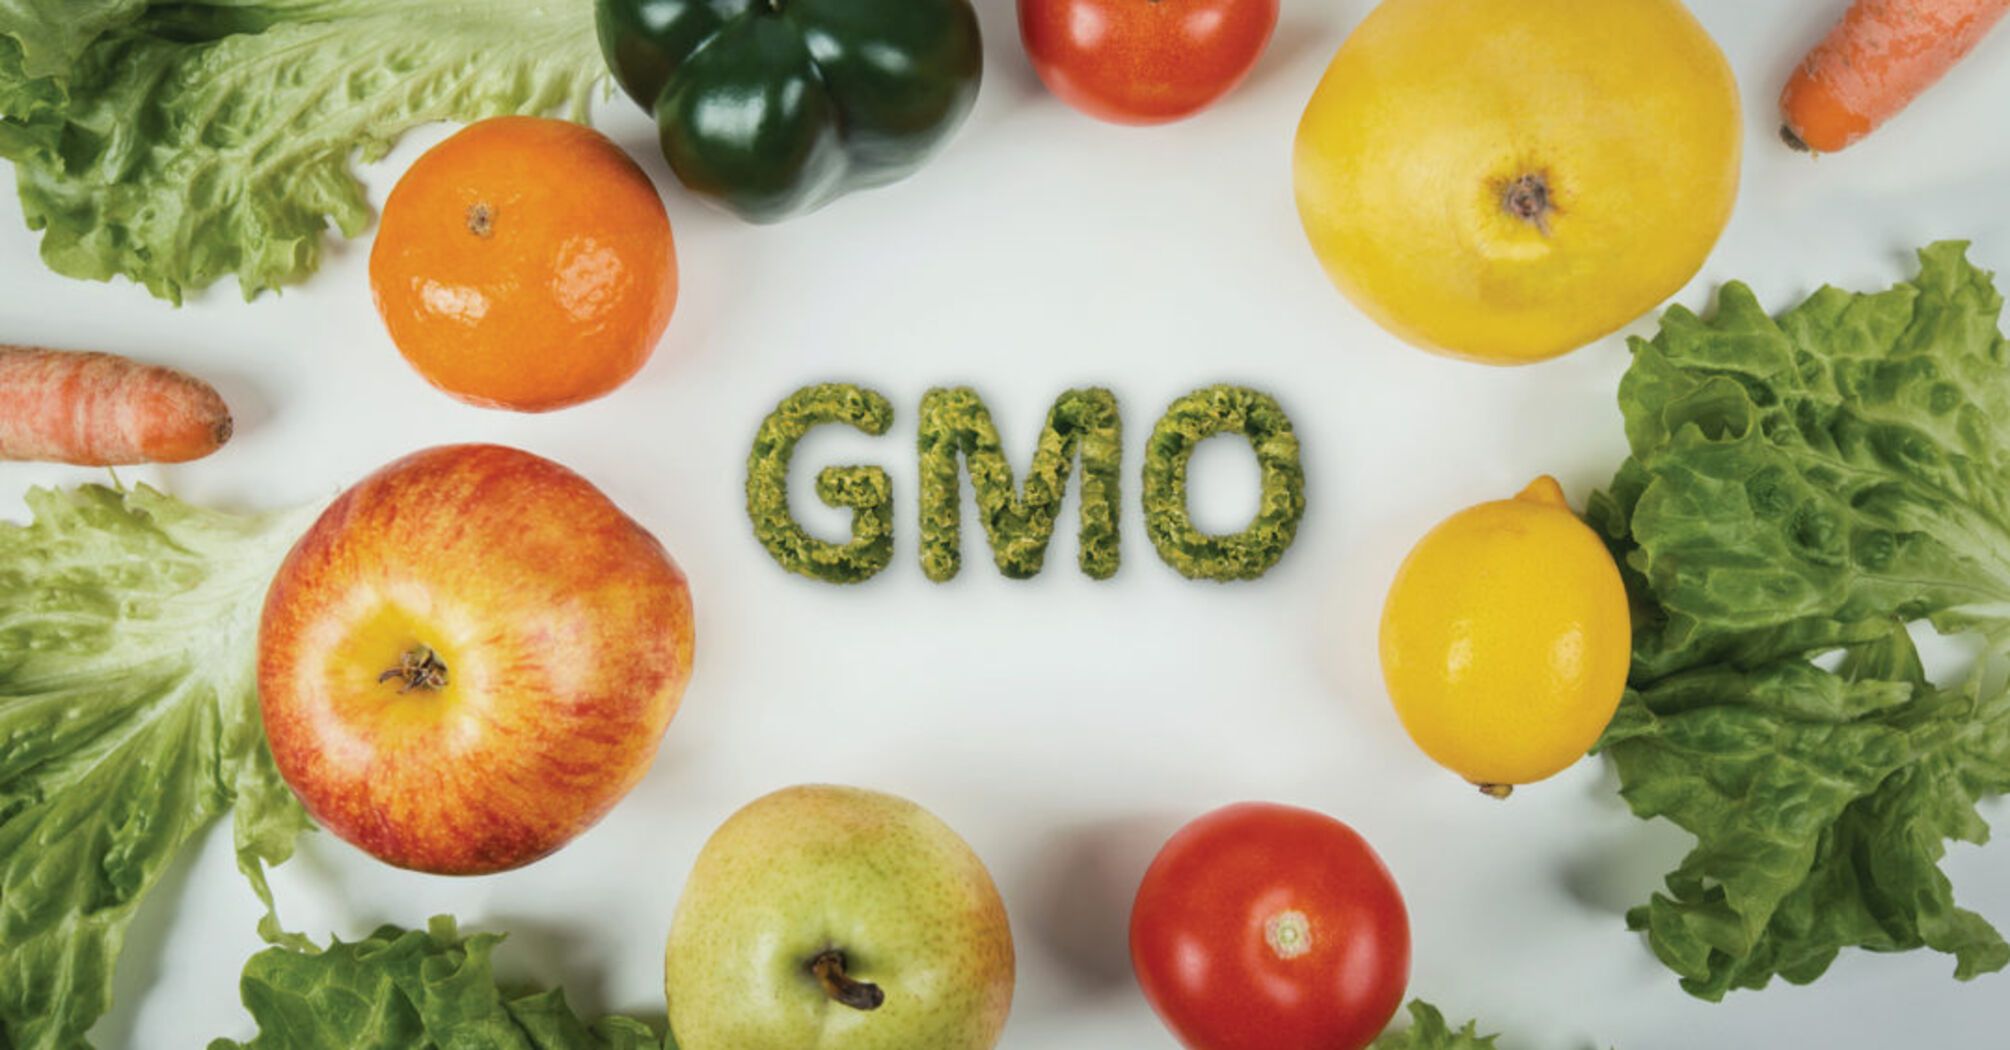 Features of genetically modified organisms (GMOs)